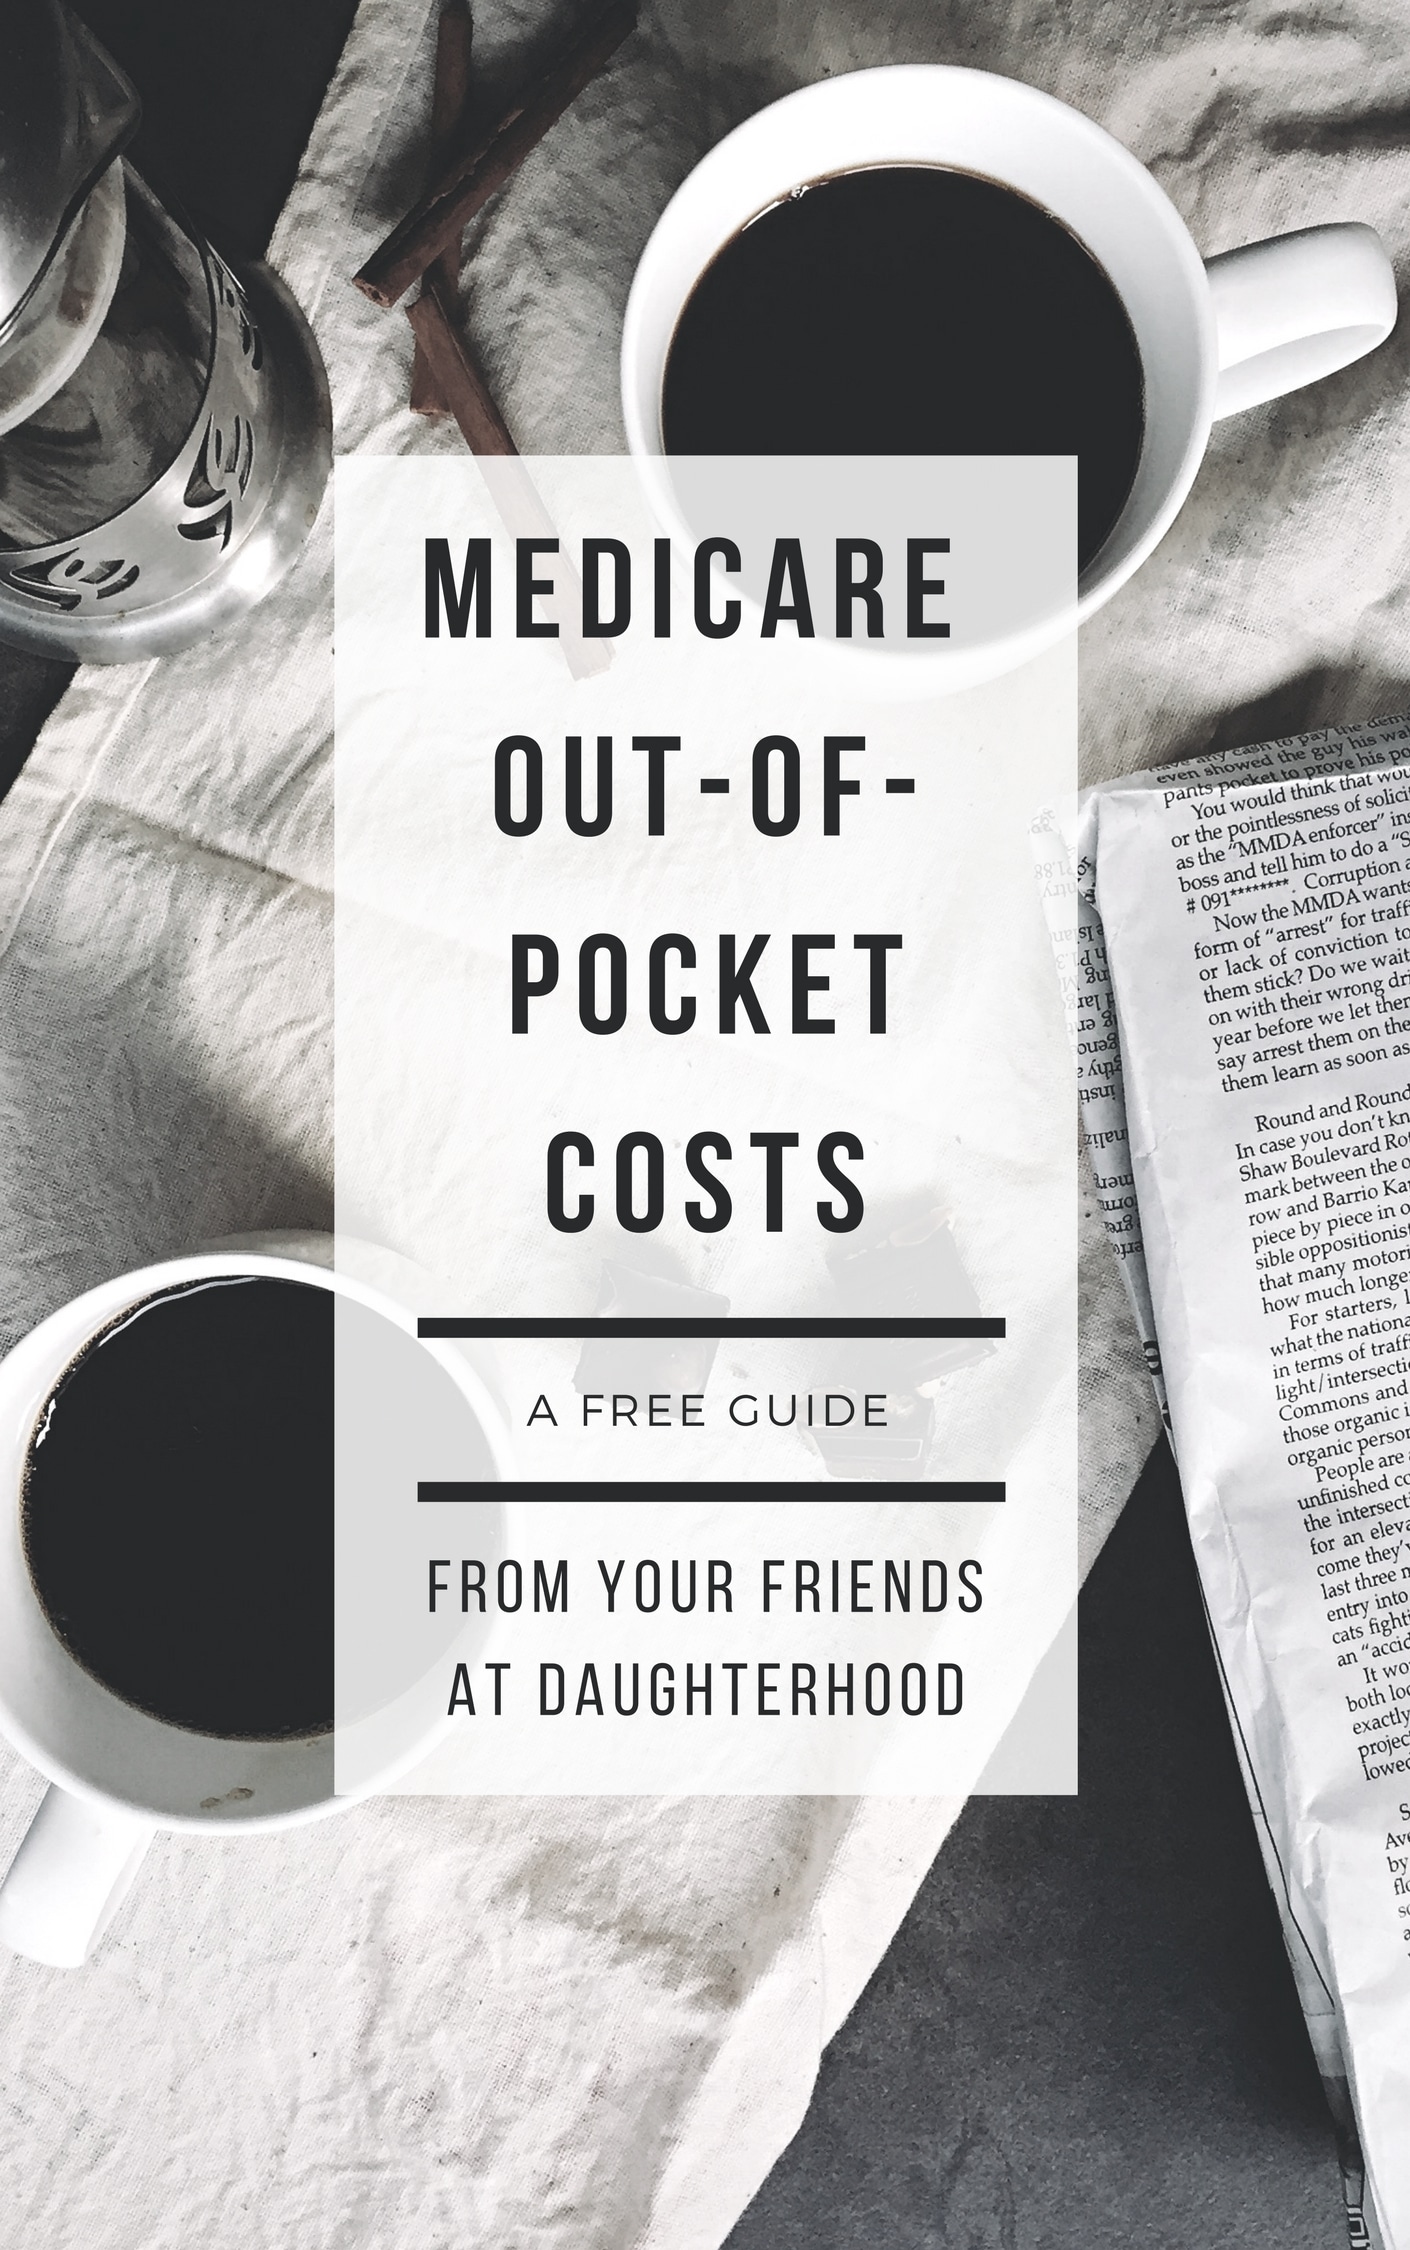 Medicare Out-Of-Pocket Costs